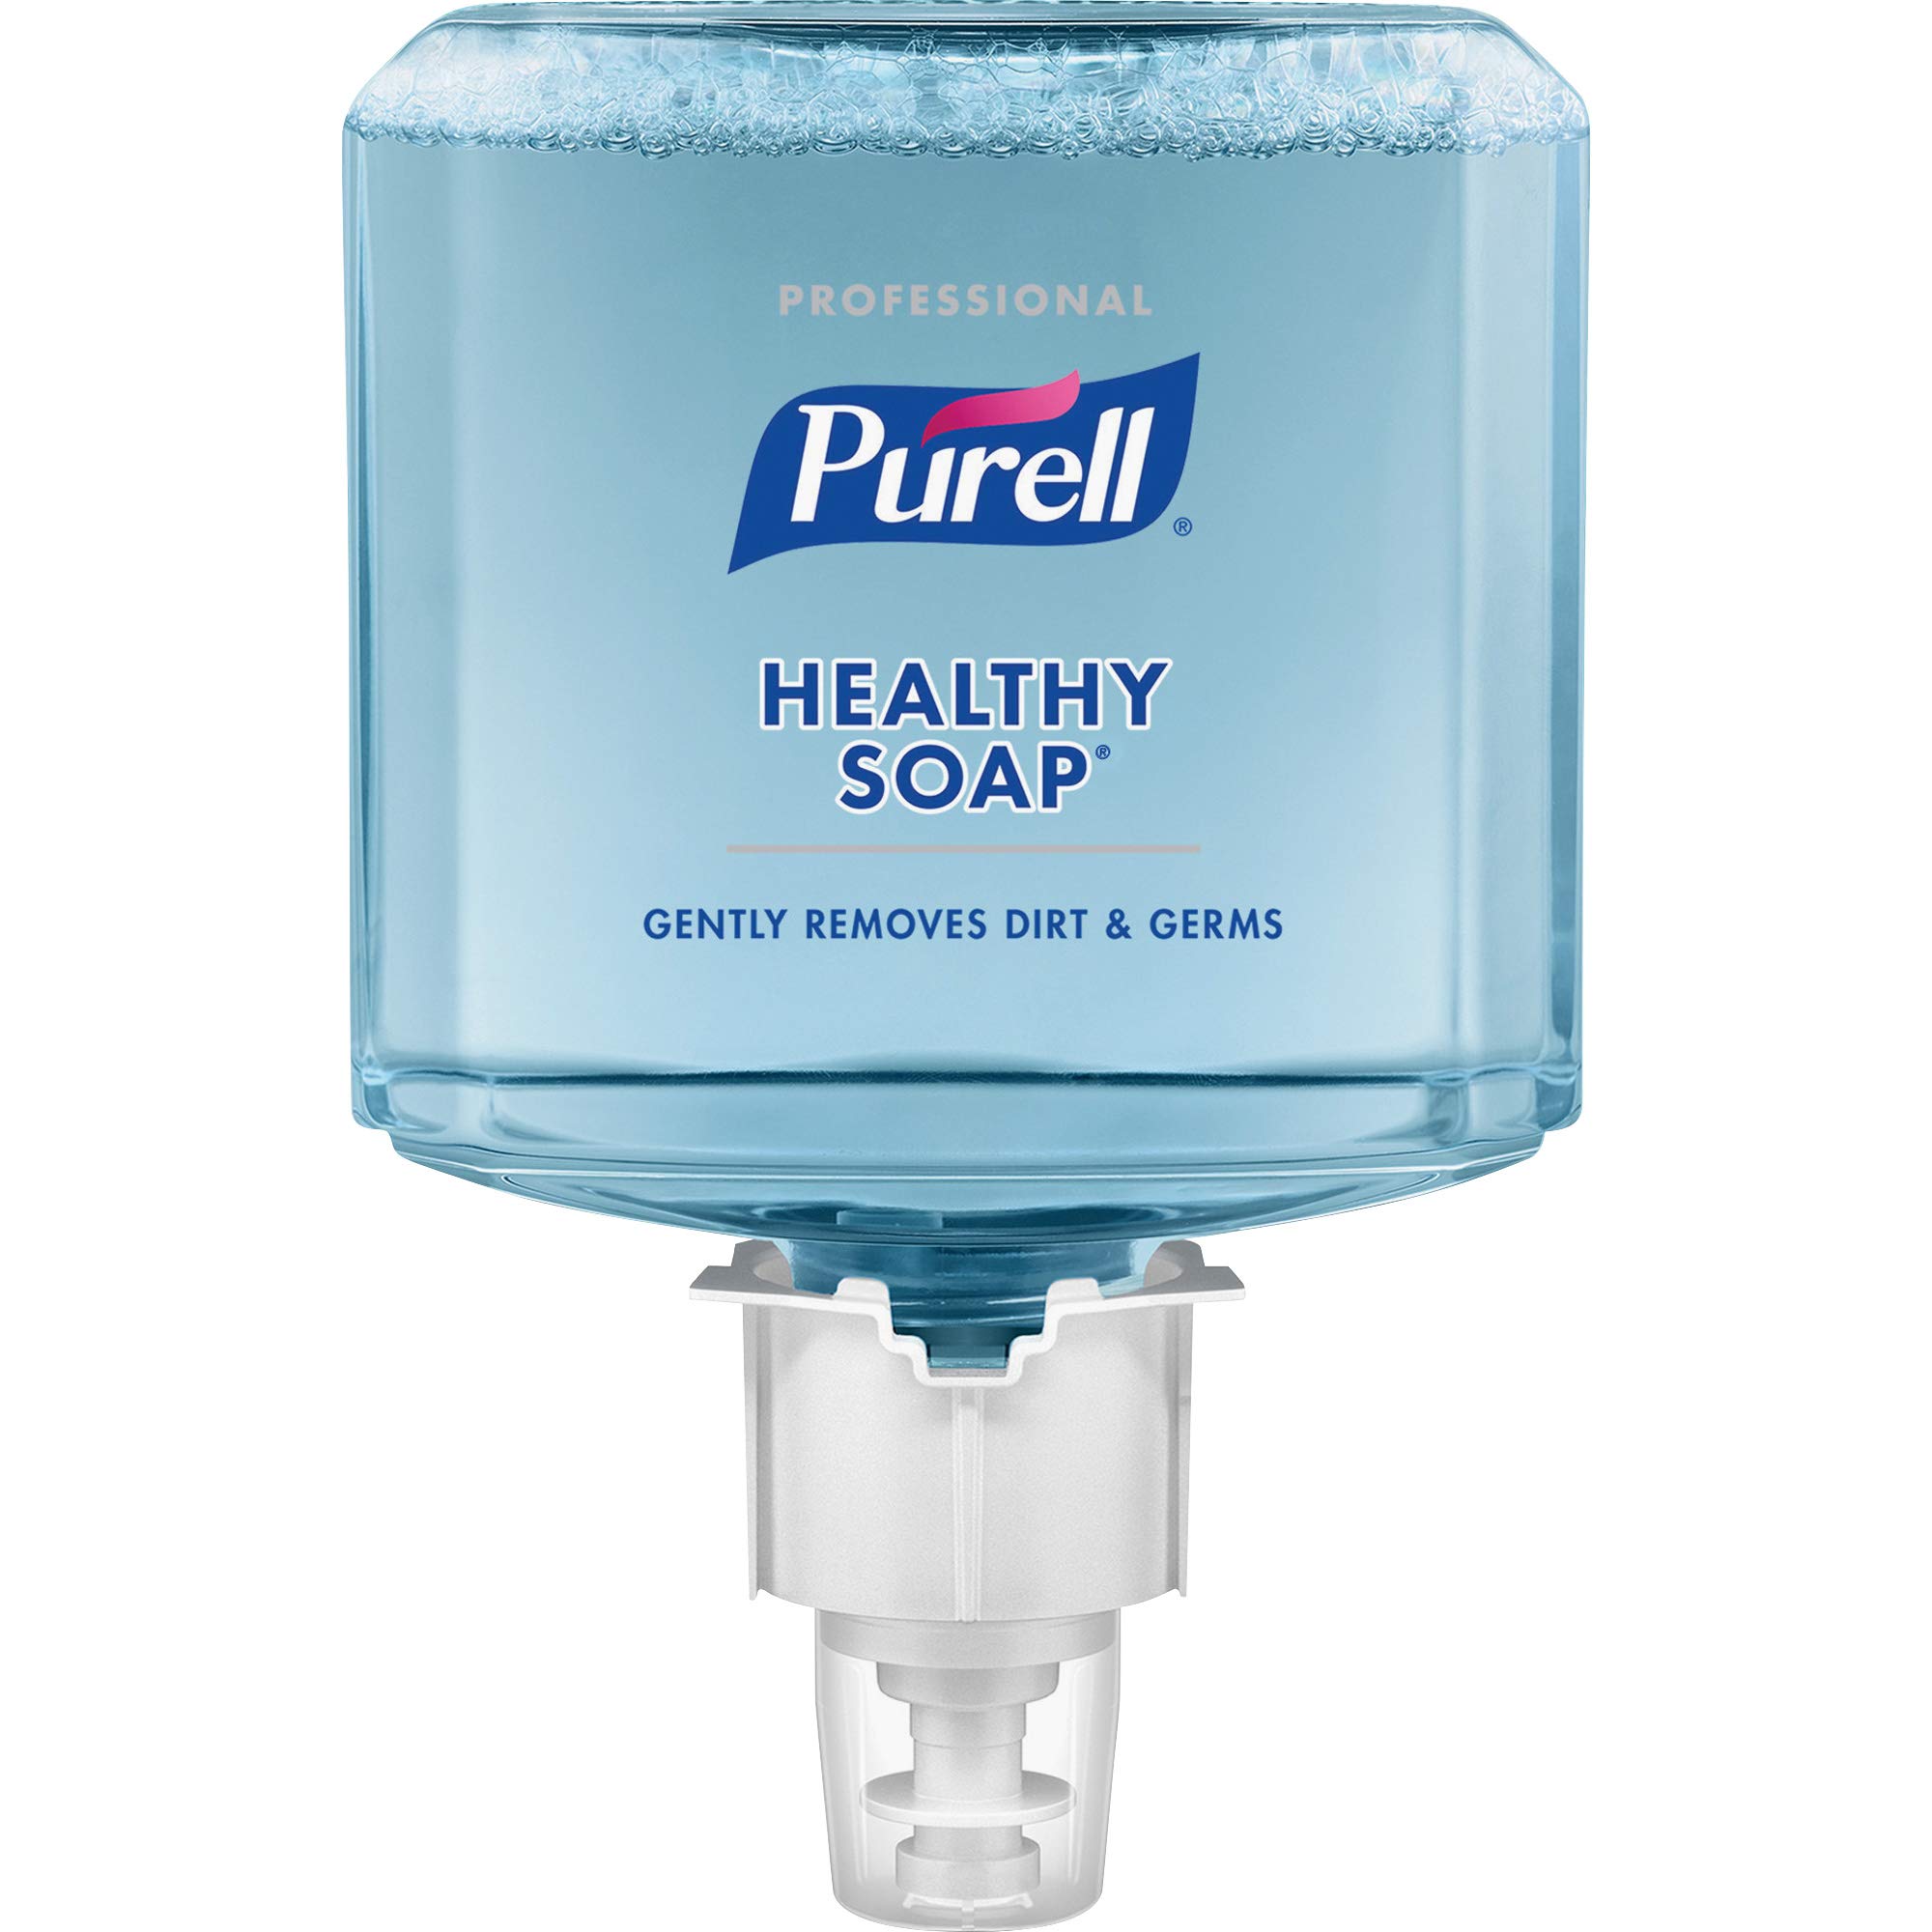 PURELL ES4 Professional HEALTHY SOAP Foam Refill, Fresh Scent, 1200 mL Soap Refill for PURELL ES4 Push-Style Dispenser (Pack of 2) – 5077-02, Blue